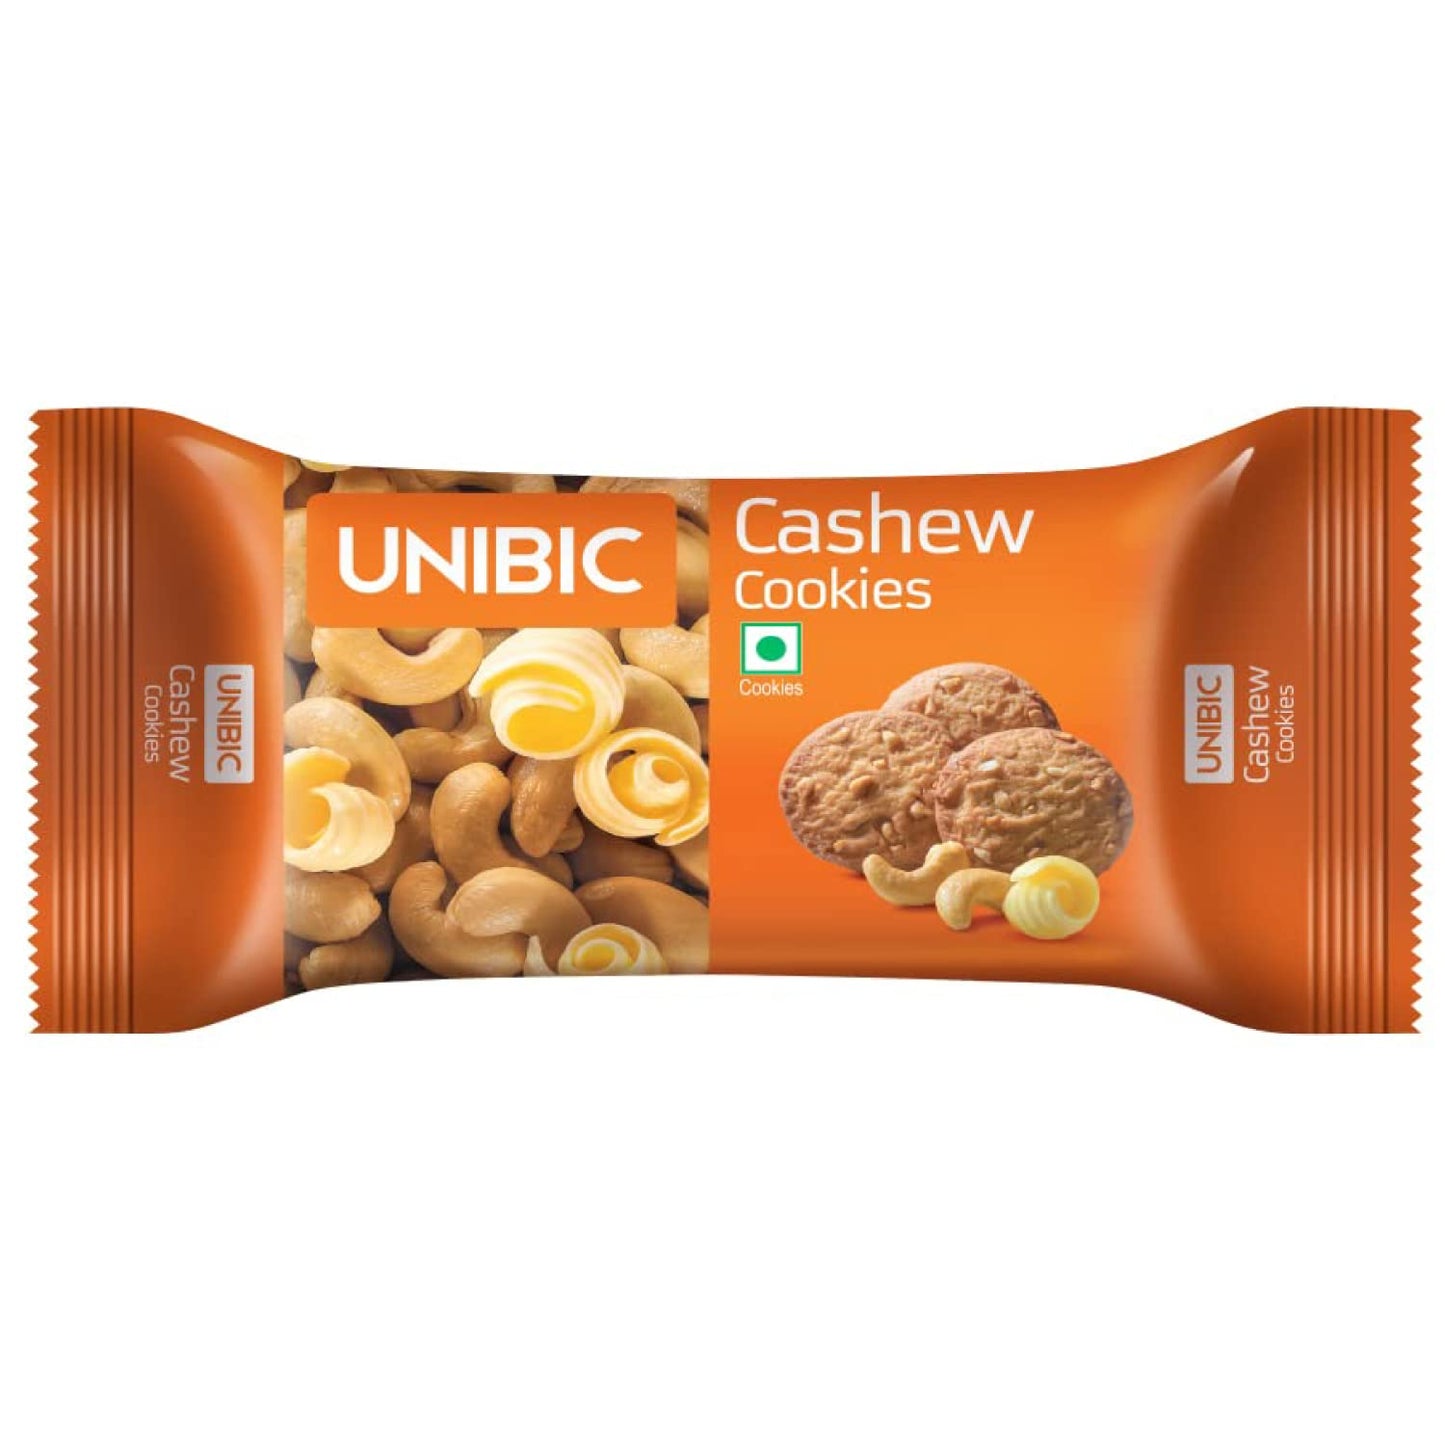 UNIBIC Cashew Cookies Tiffin Pack (900g, Pack of 12)